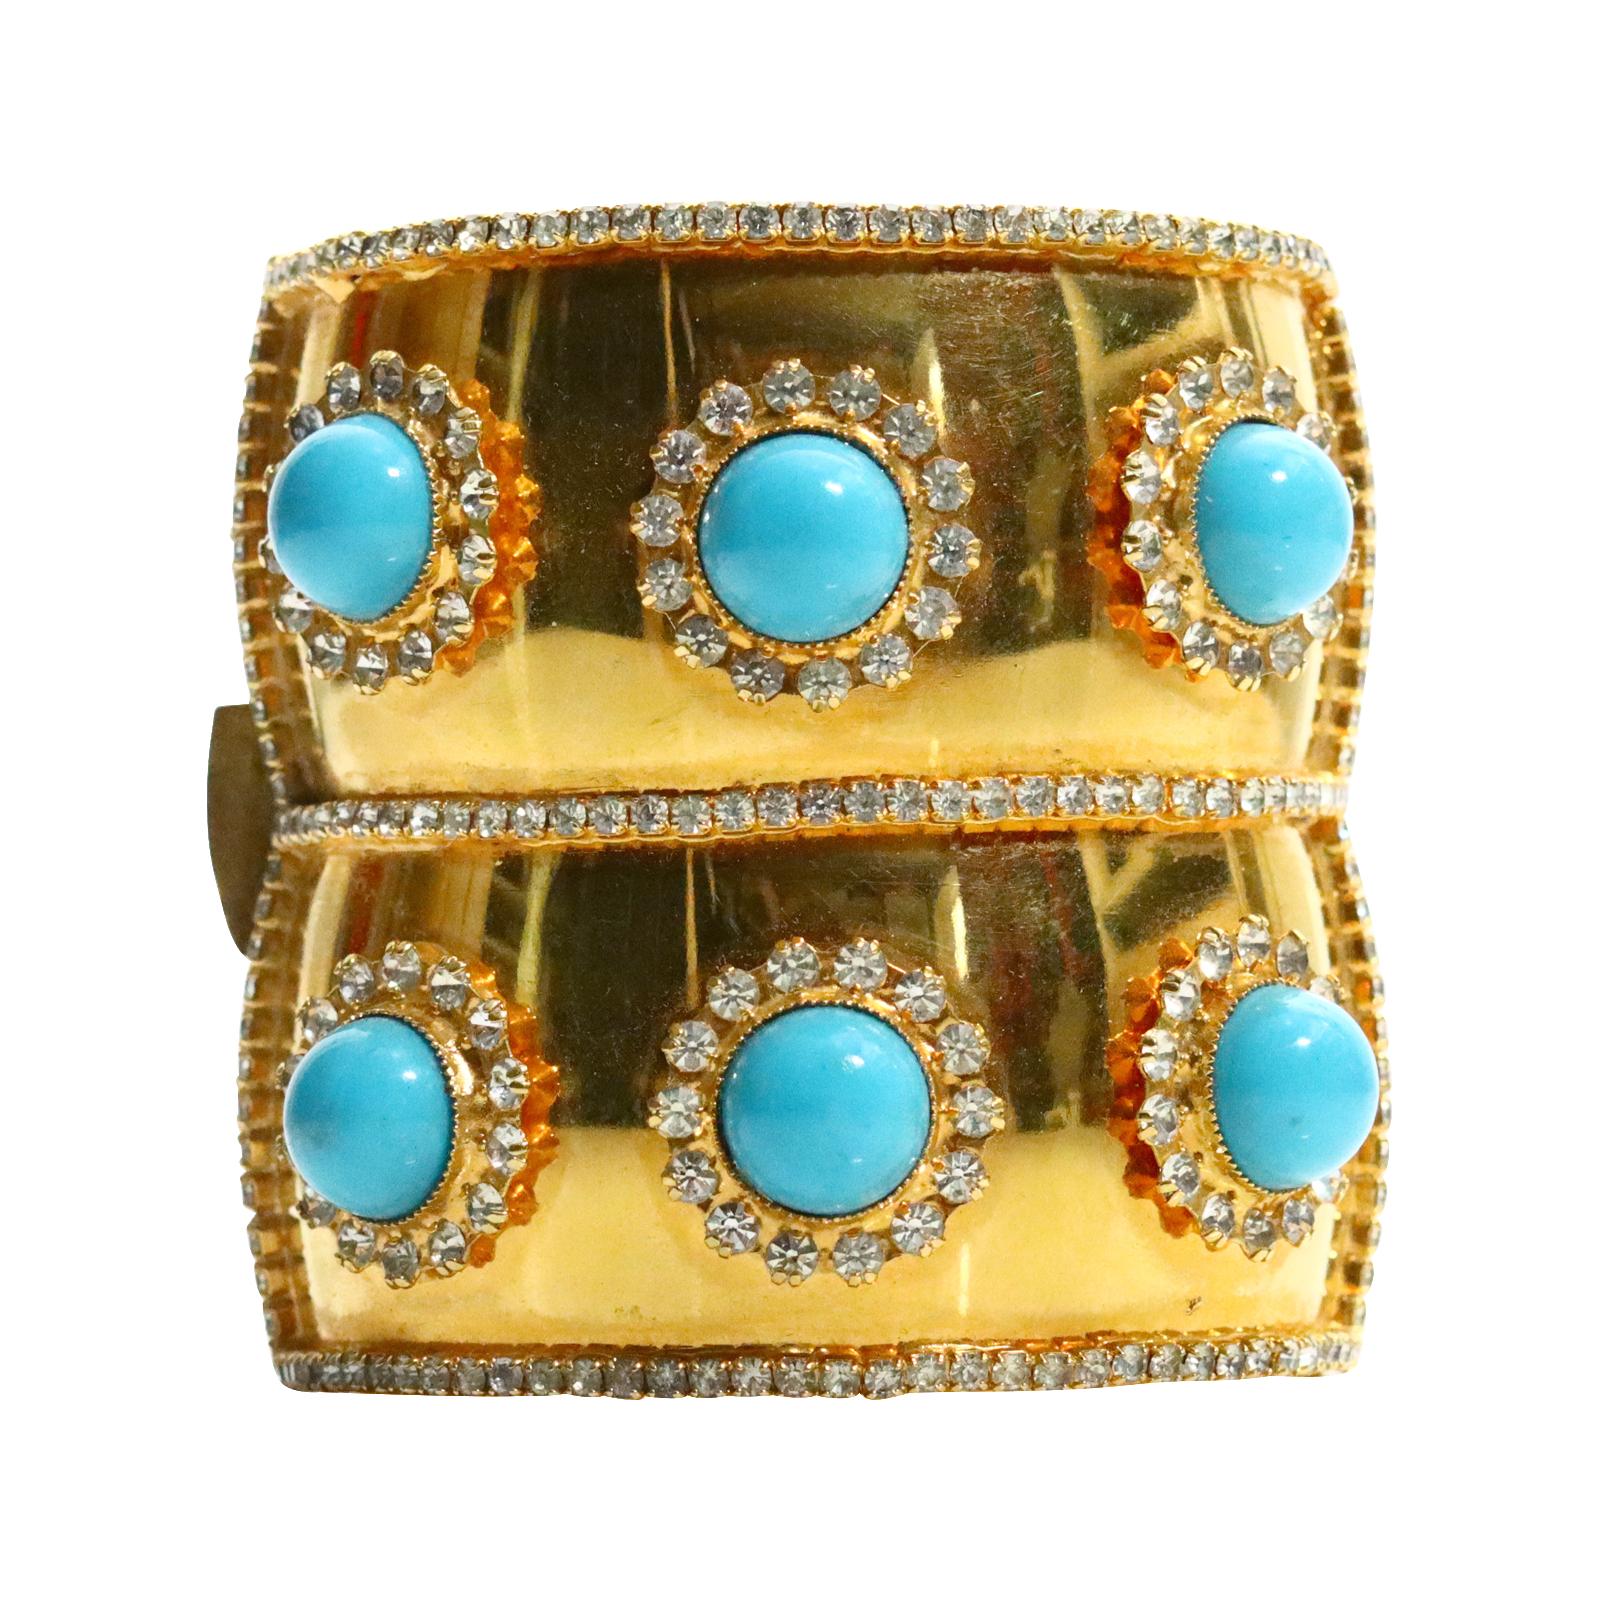 Vintage deLillo Gold Tone Crystal with Faux Turquoise Bracelet Circa !970s For Sale 7